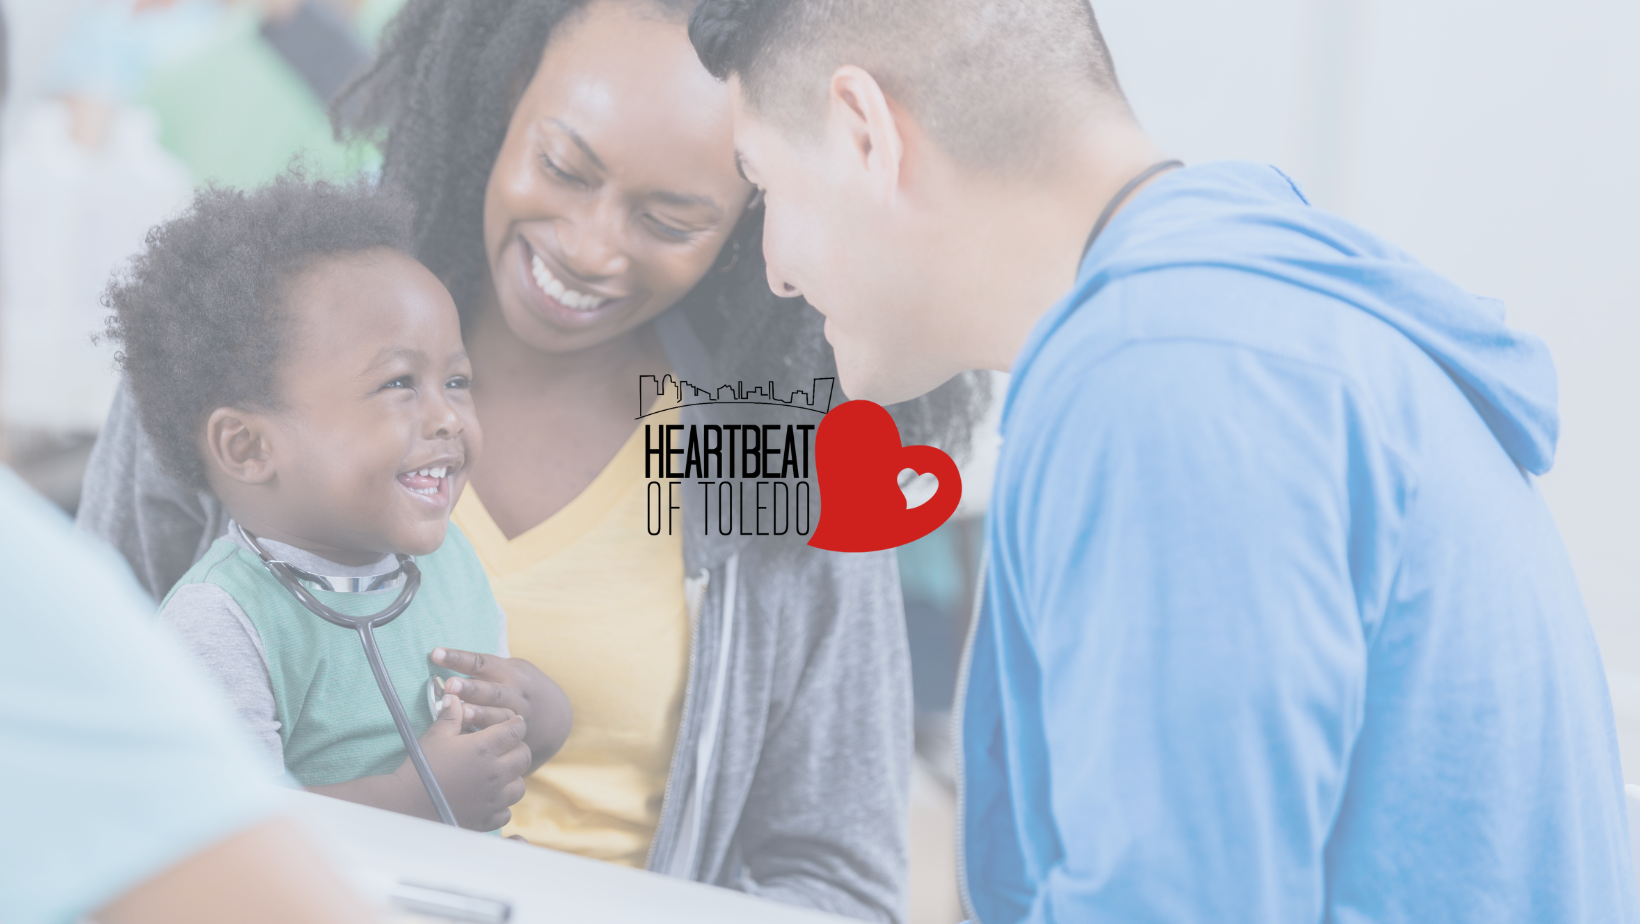 Heartbeat Highlights: Celebrating Community Support for Heartbeat’s Mission